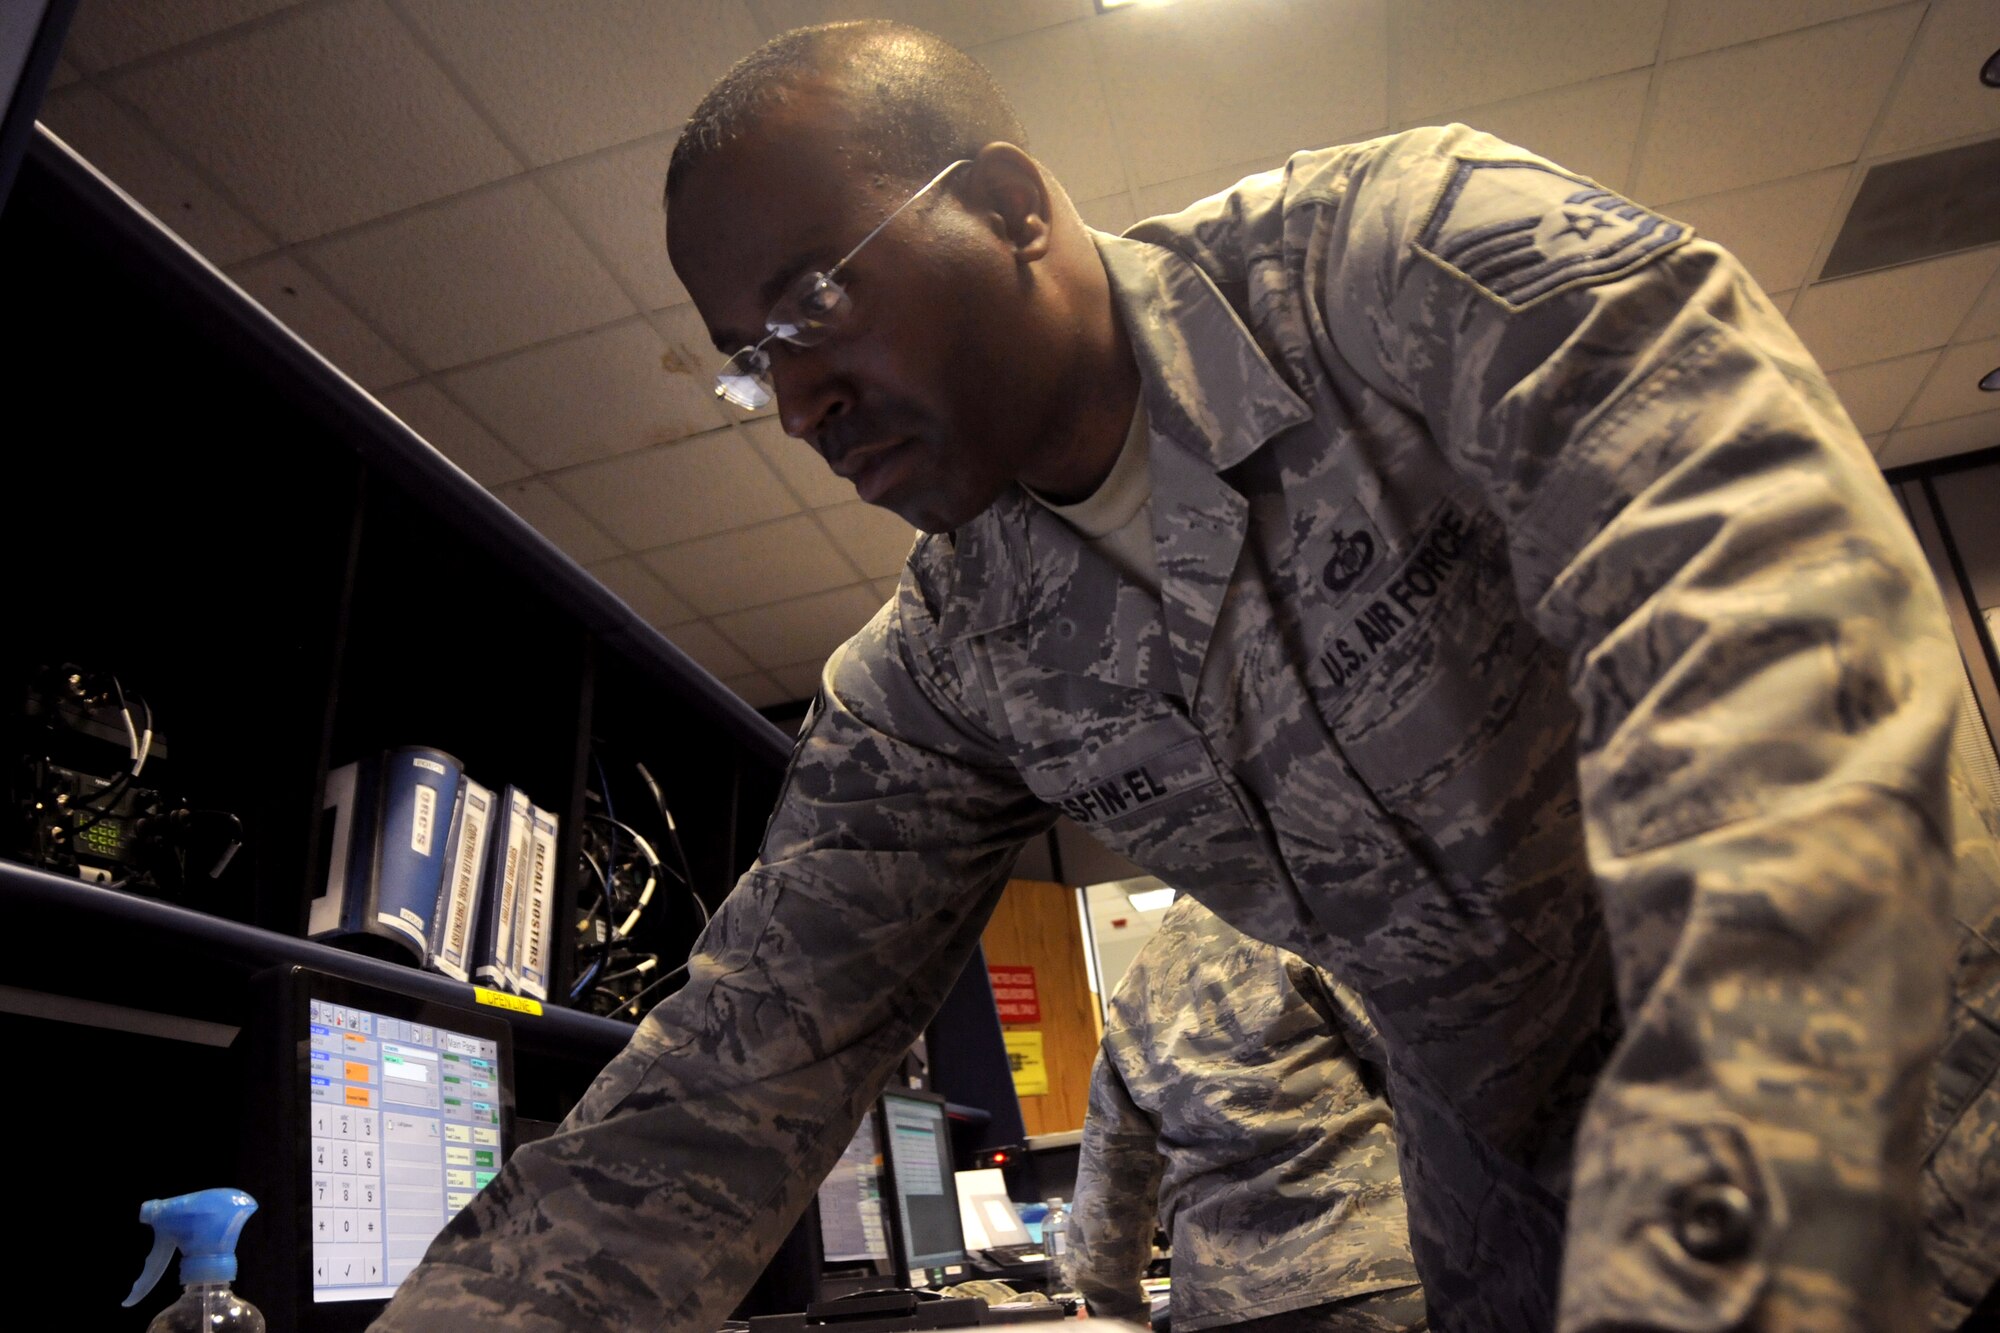 Master Sgt. Elijah Mesfin-El, a 108th Wing Command Post controller, checks the console during his shift Feb. 8, 2015, at Joint Base McGuire-Dix-Lakehurst, N.J. Command post serves as the eye and ears of the wing commander. They work every day at all hours to receive and give messages for the entire wing. (U.S. Air National Guard Photo by Airman 1st Class Julia Pyun/Released)